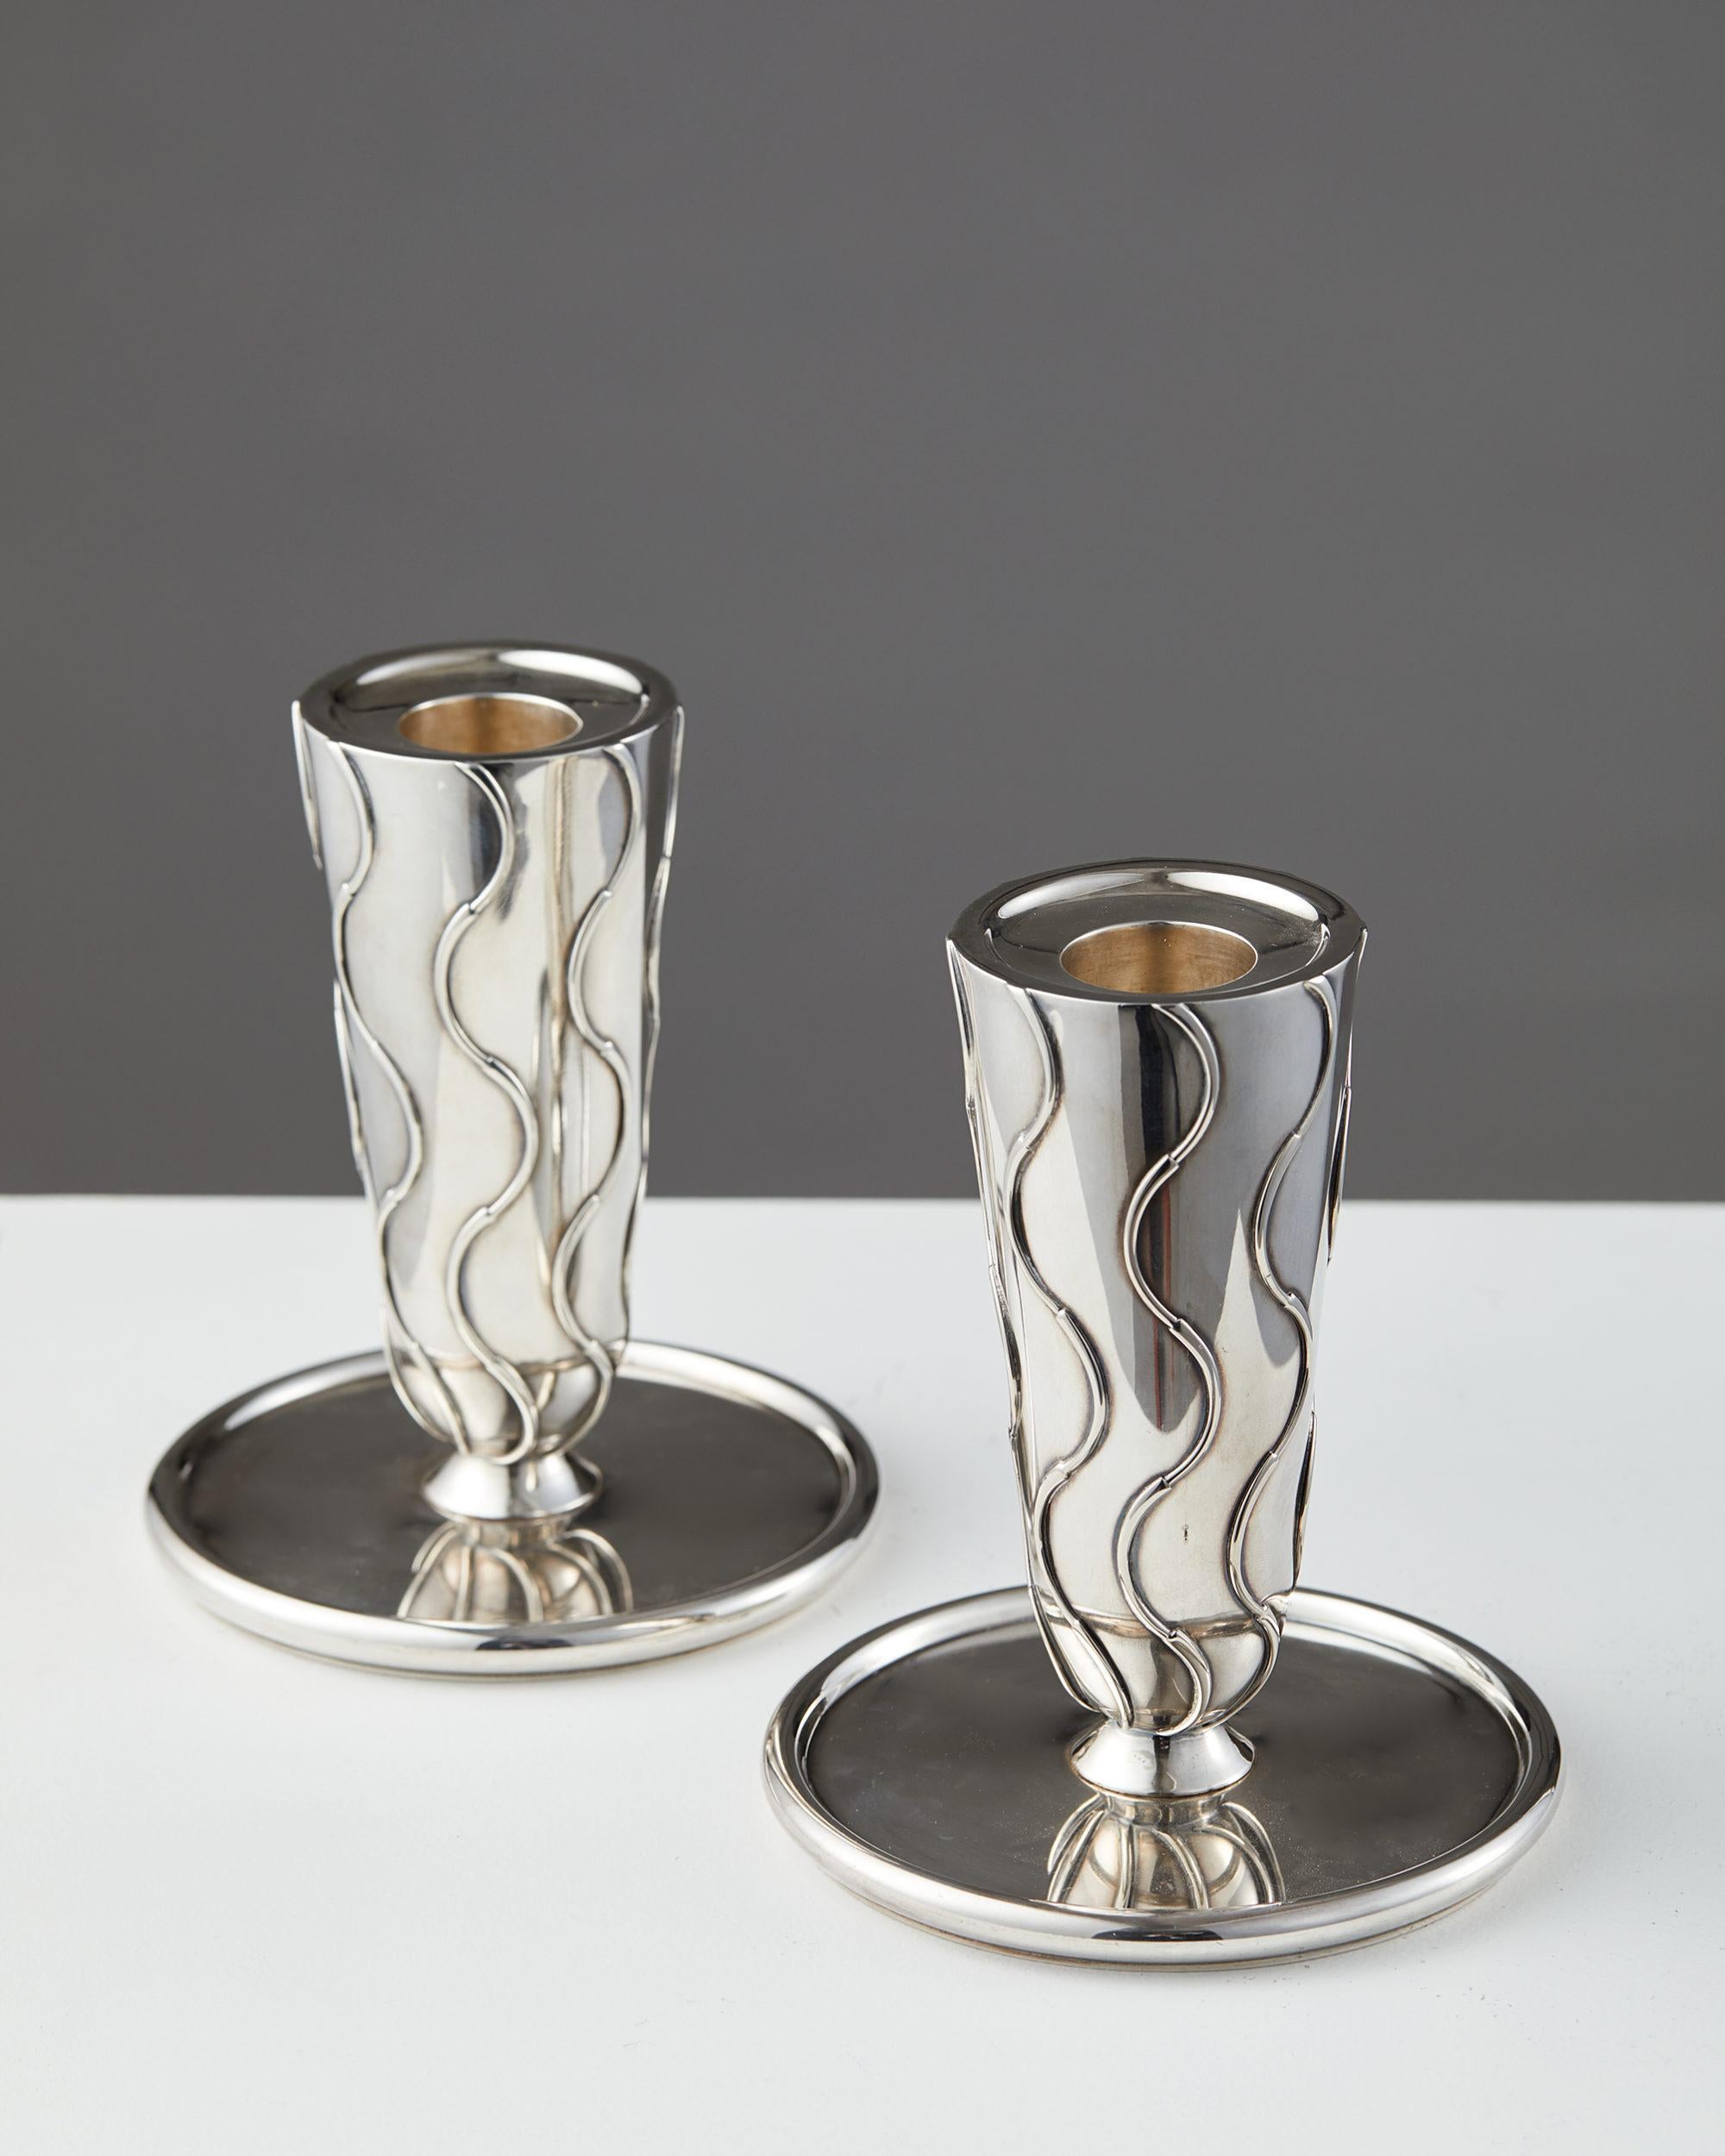 Pair of conical candleholders designed by Svend Weihrauch, Denmark, 1930s.
Sterling silver.

Measures: H 15 cm/ 6